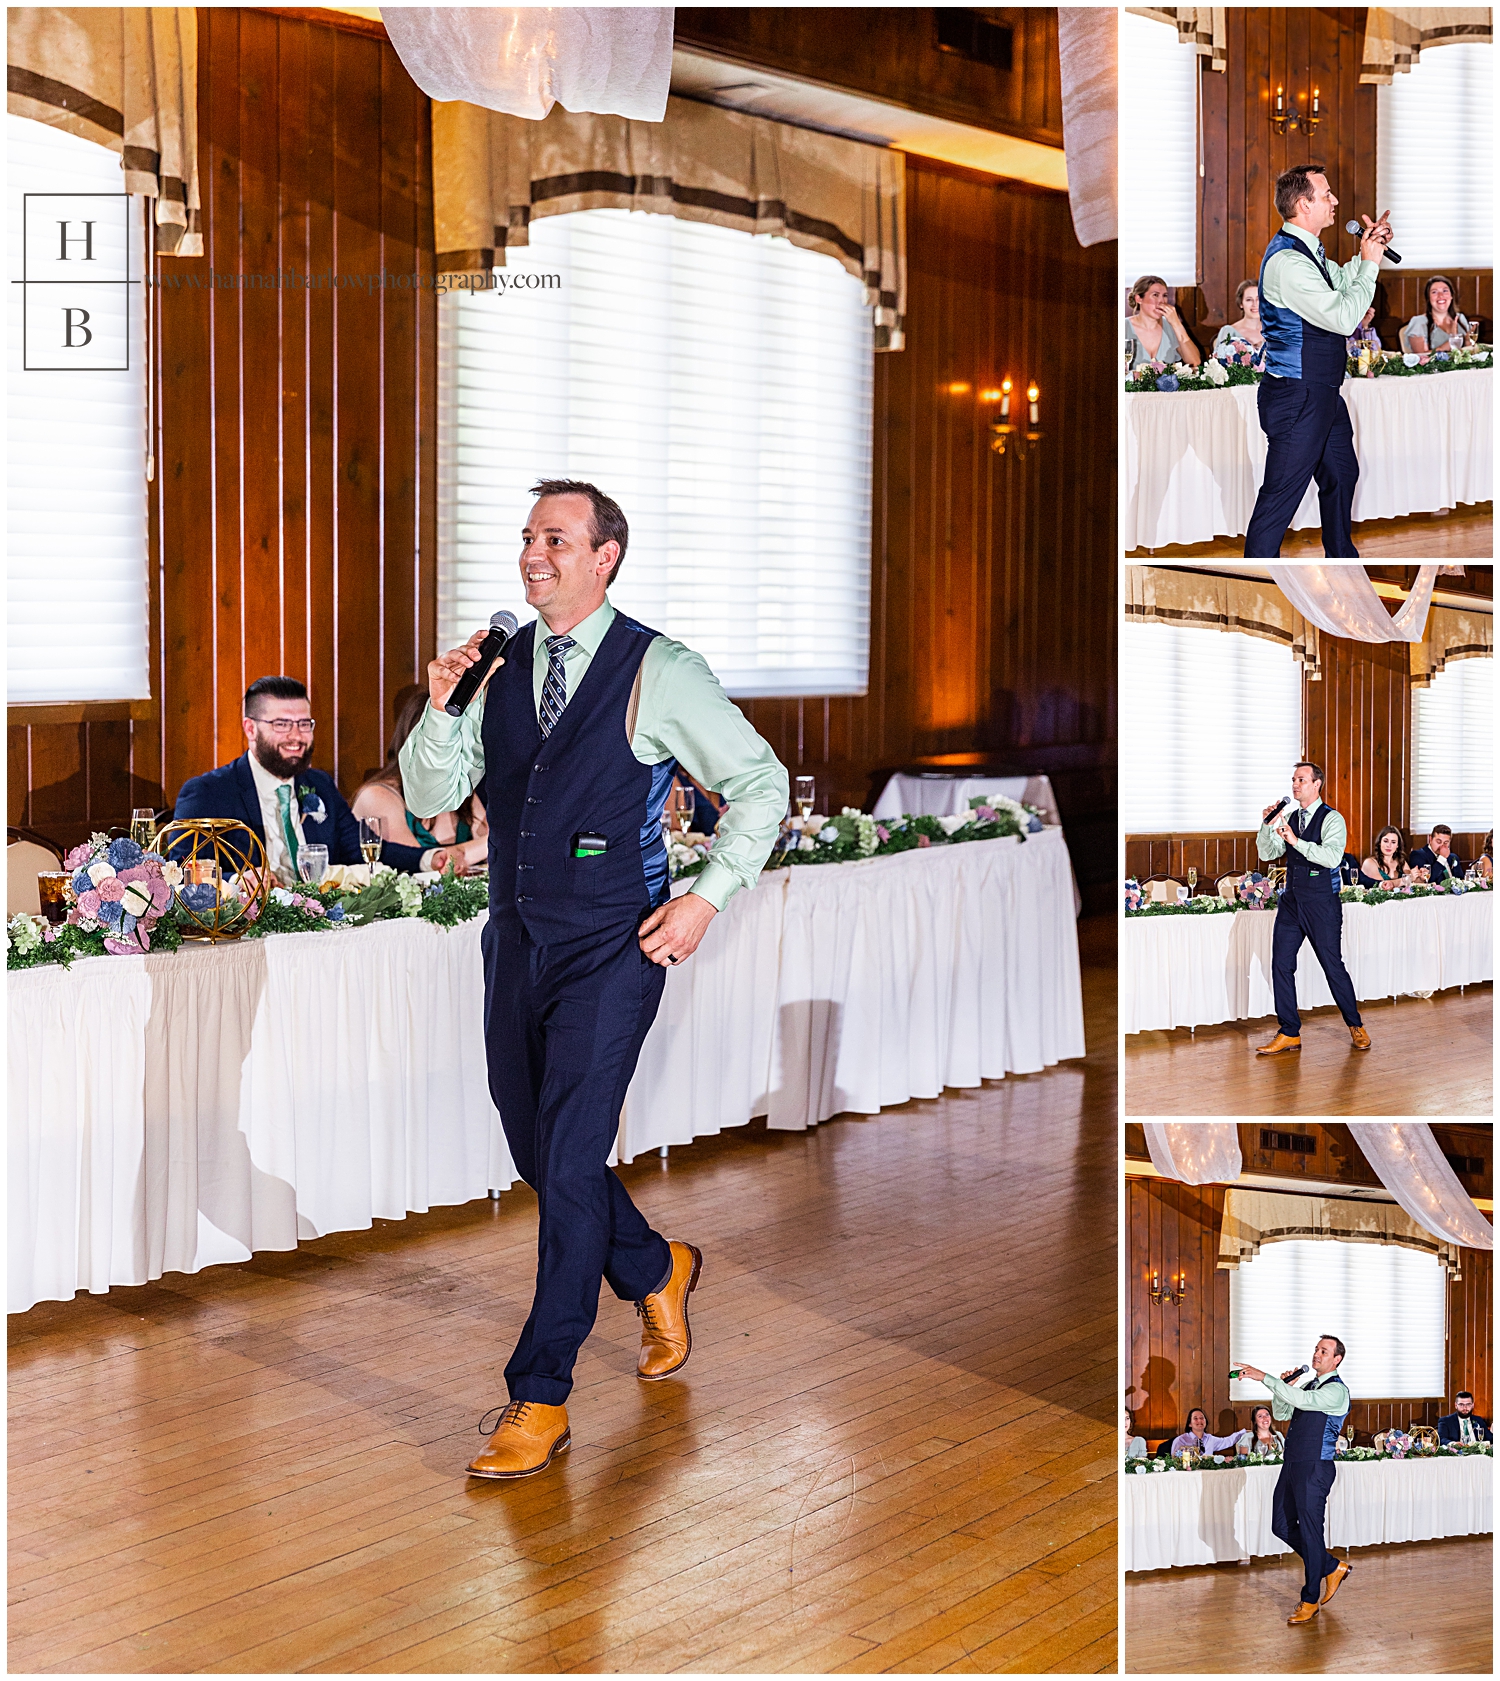 Wedding DJ in green shirt and blue suit walks and introduces couple.